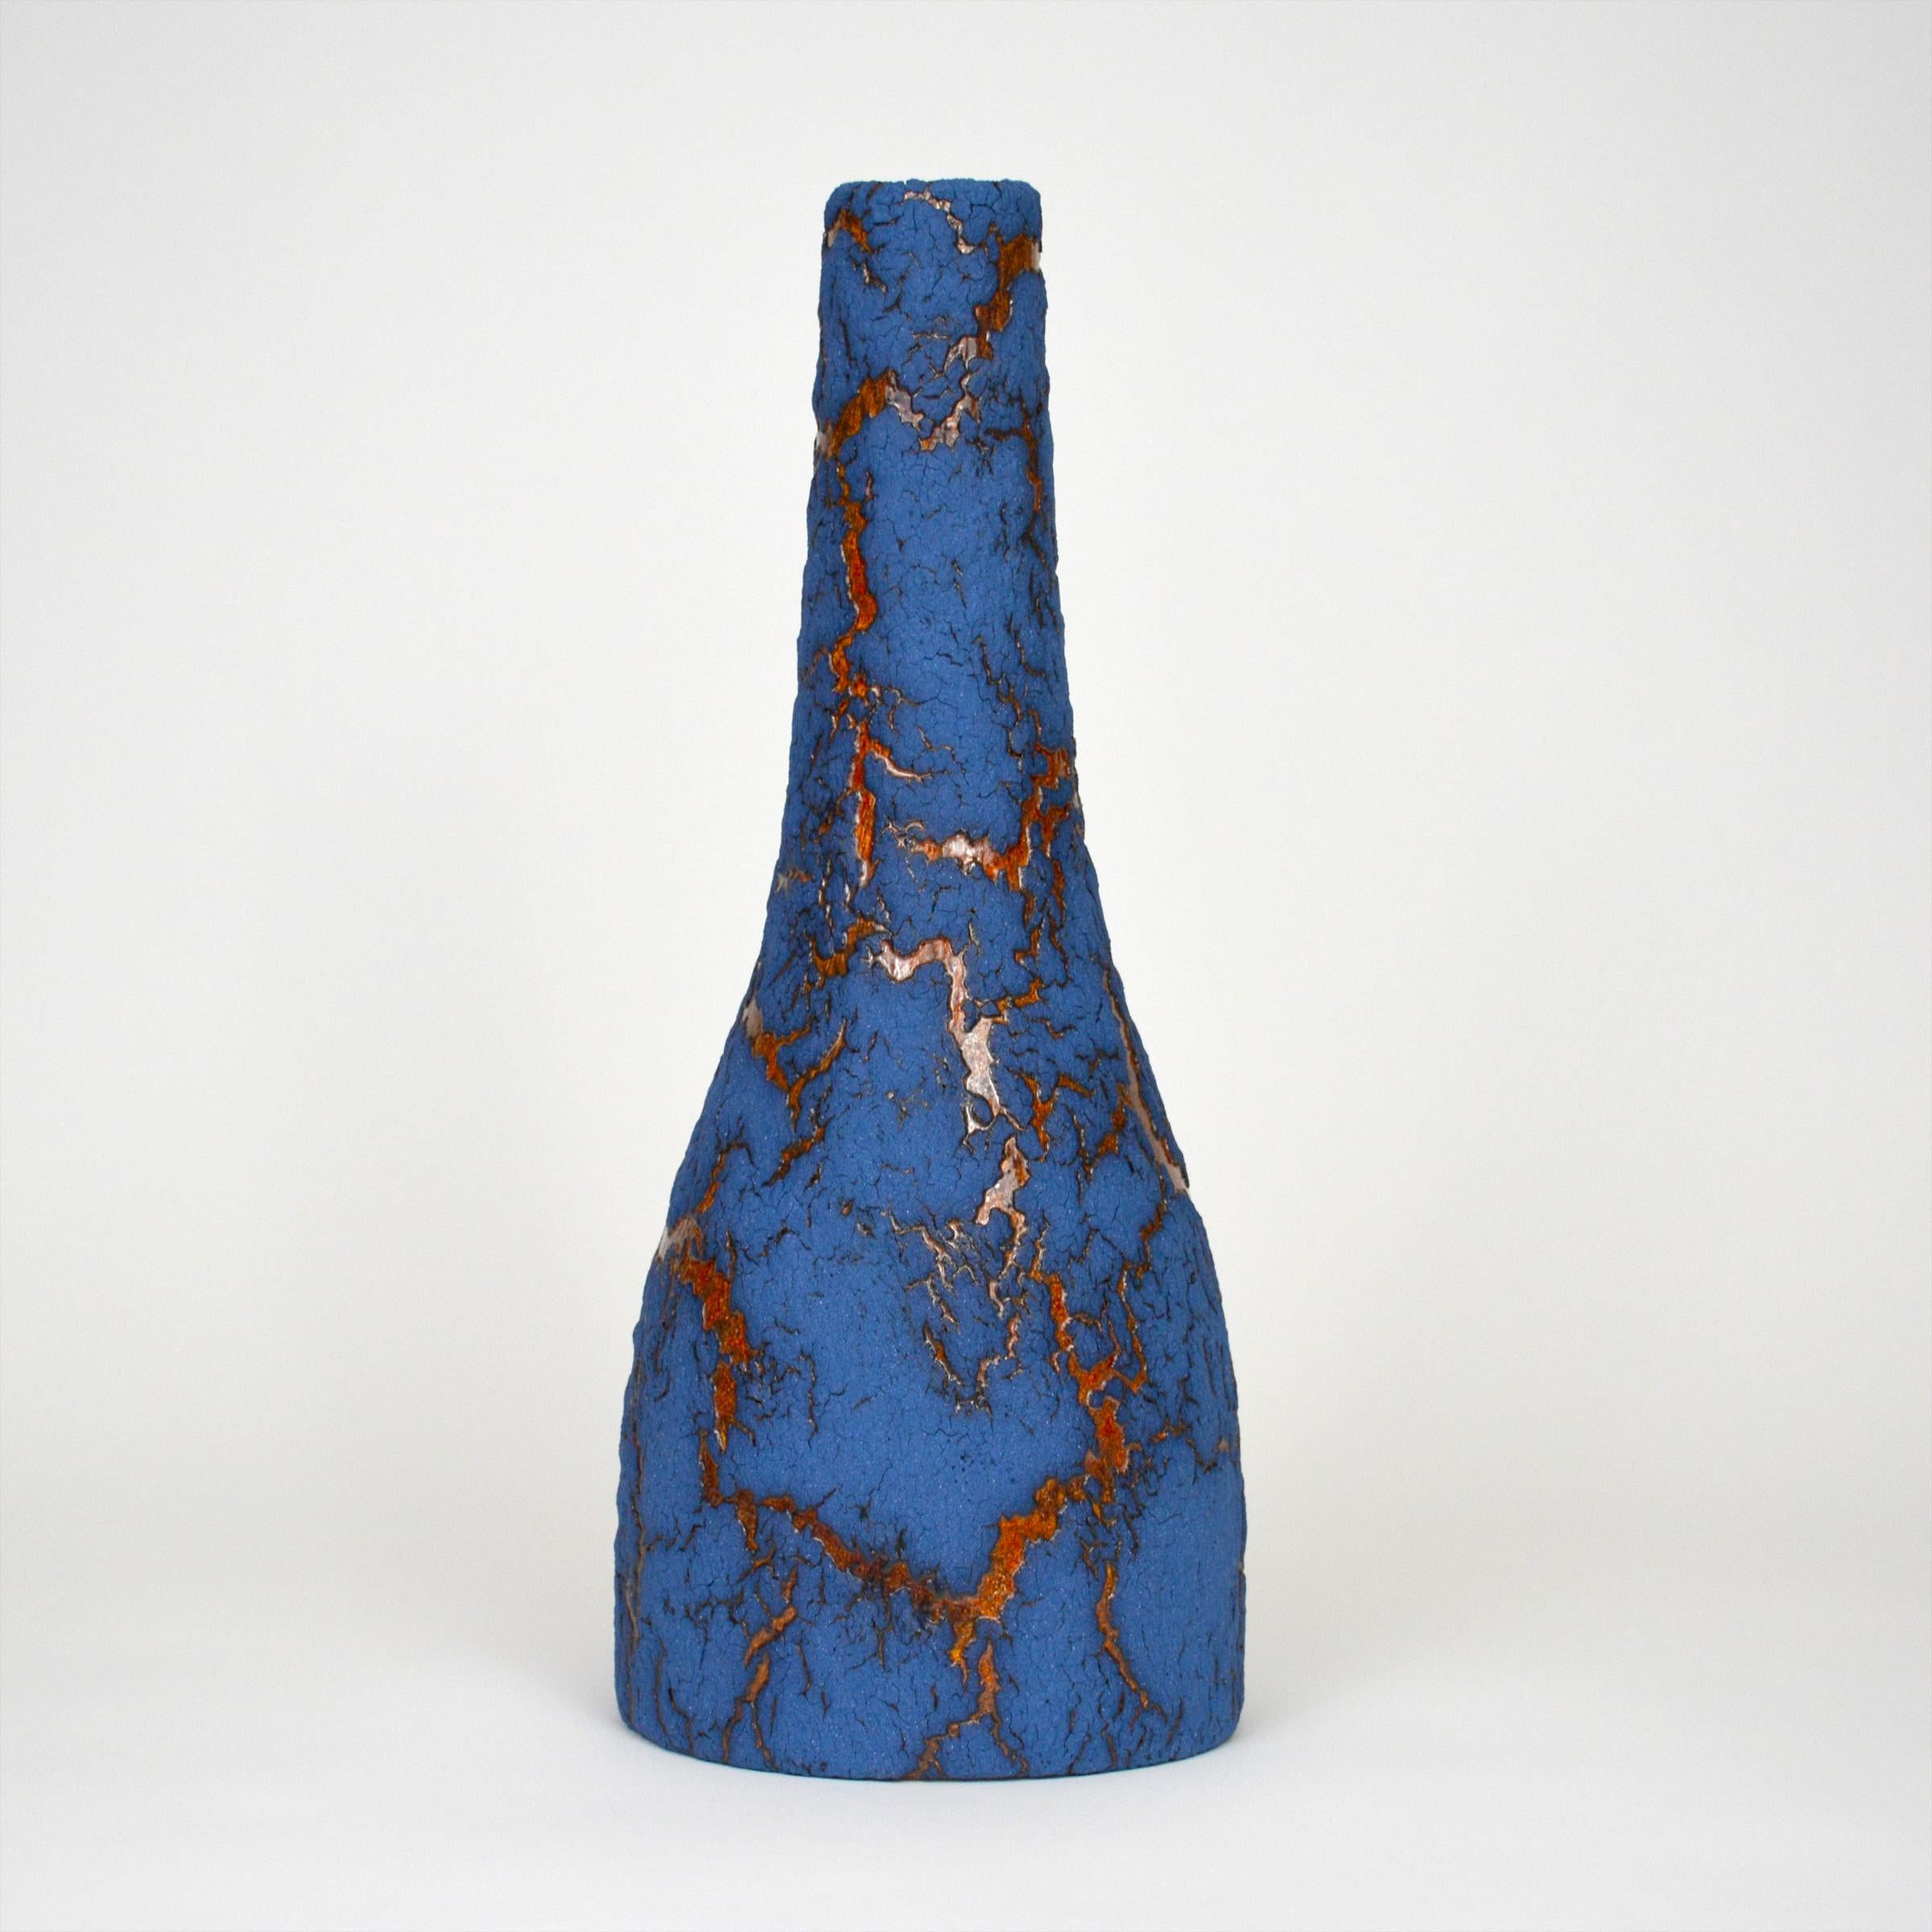 Ceramic bottle by William Edwards
Hand built earthenware vessel, fired multiple times to achieve a textured surface of random abstraction, matte blue with amber gloss microcrystalline glaze breaking through that sparkles in certain lighting